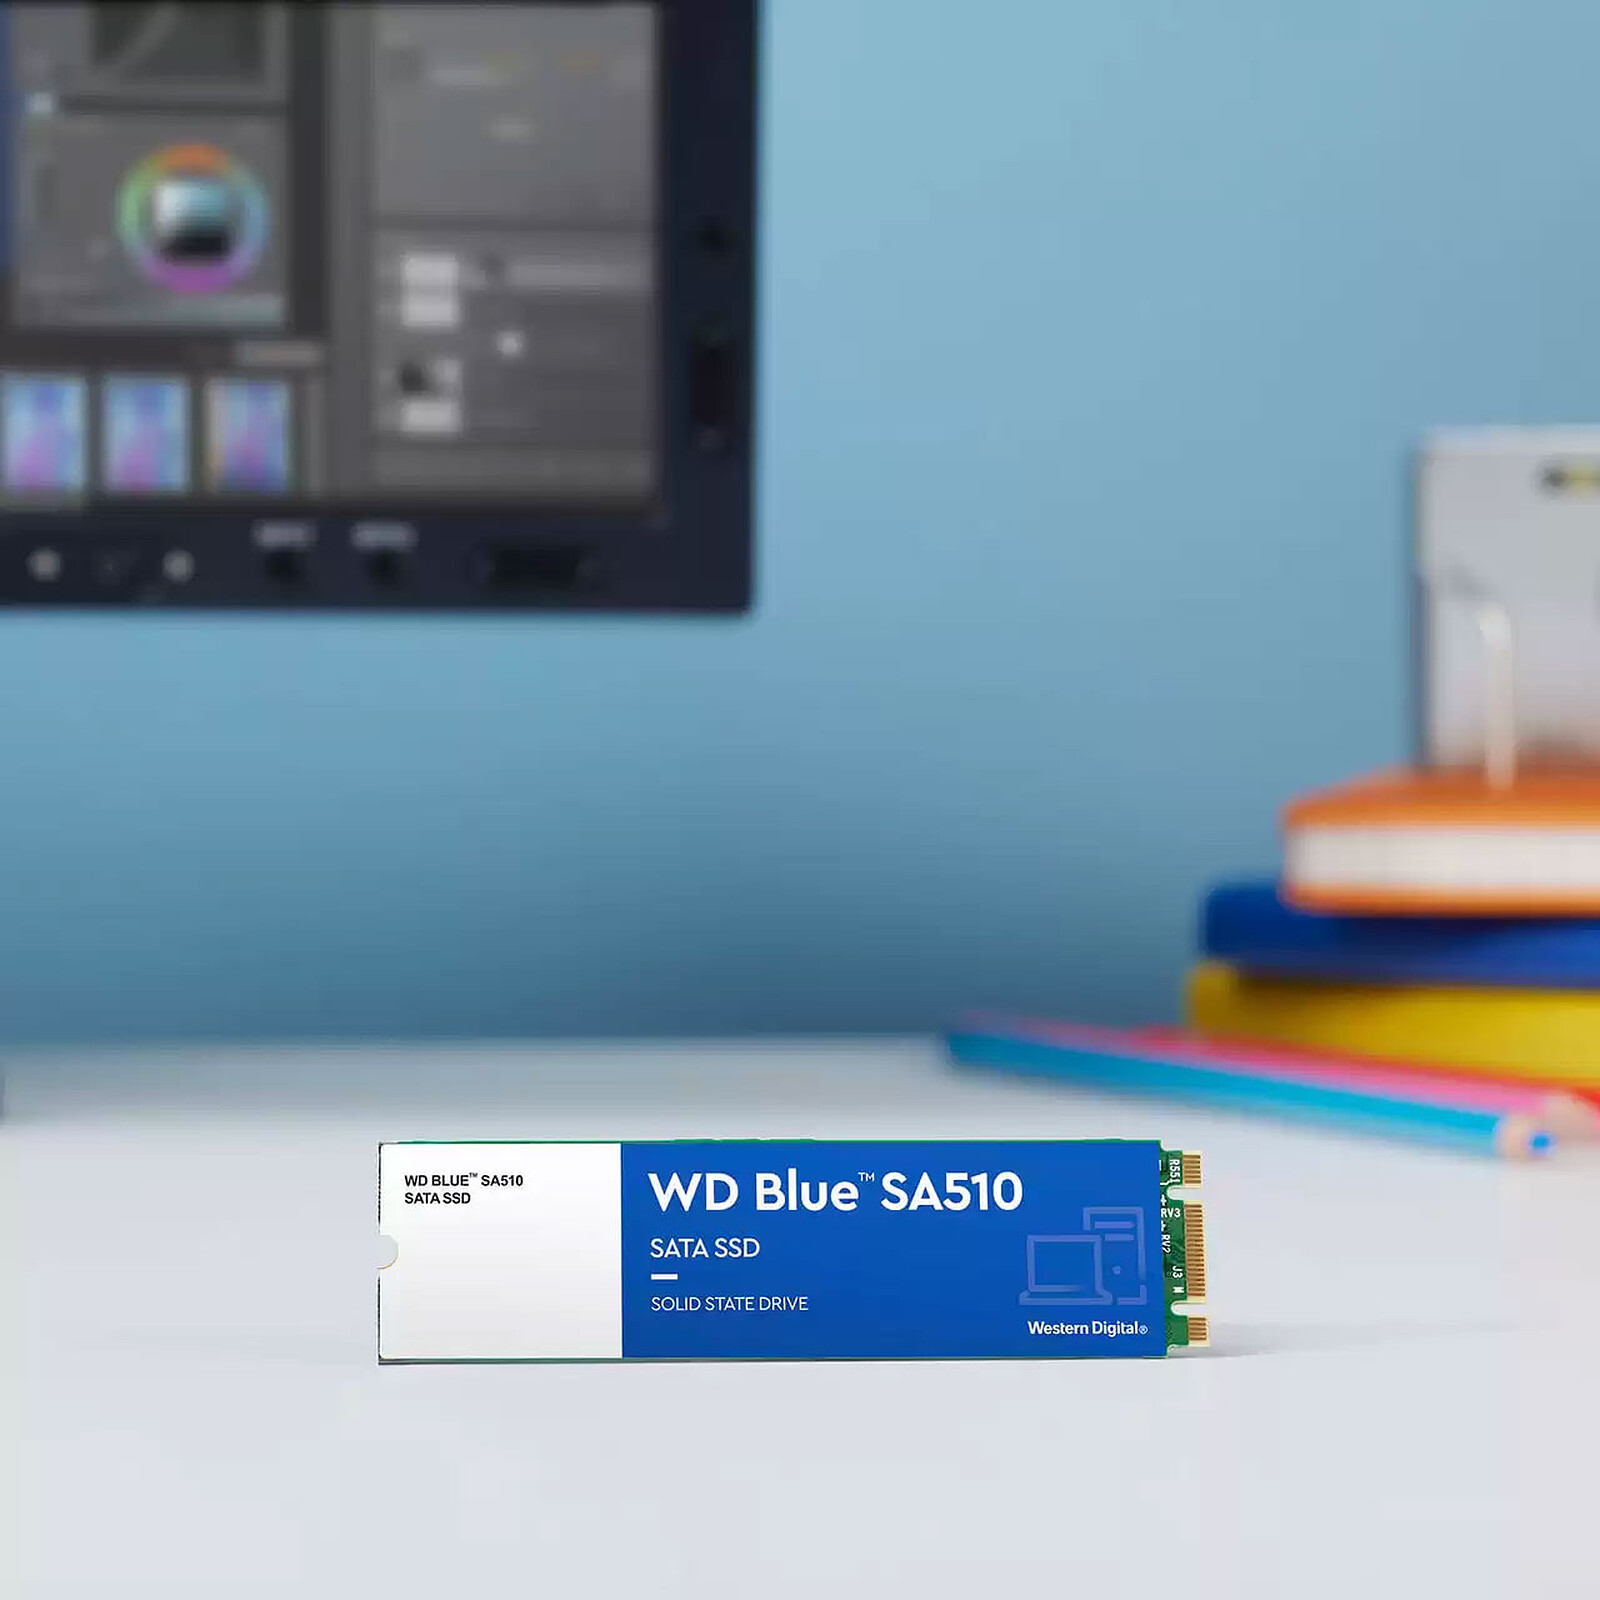 Où Trouver Western Digital - WD Blue SSD - SSD Interne 1To M.2 SATA 3D NAND  Le Moins Cher